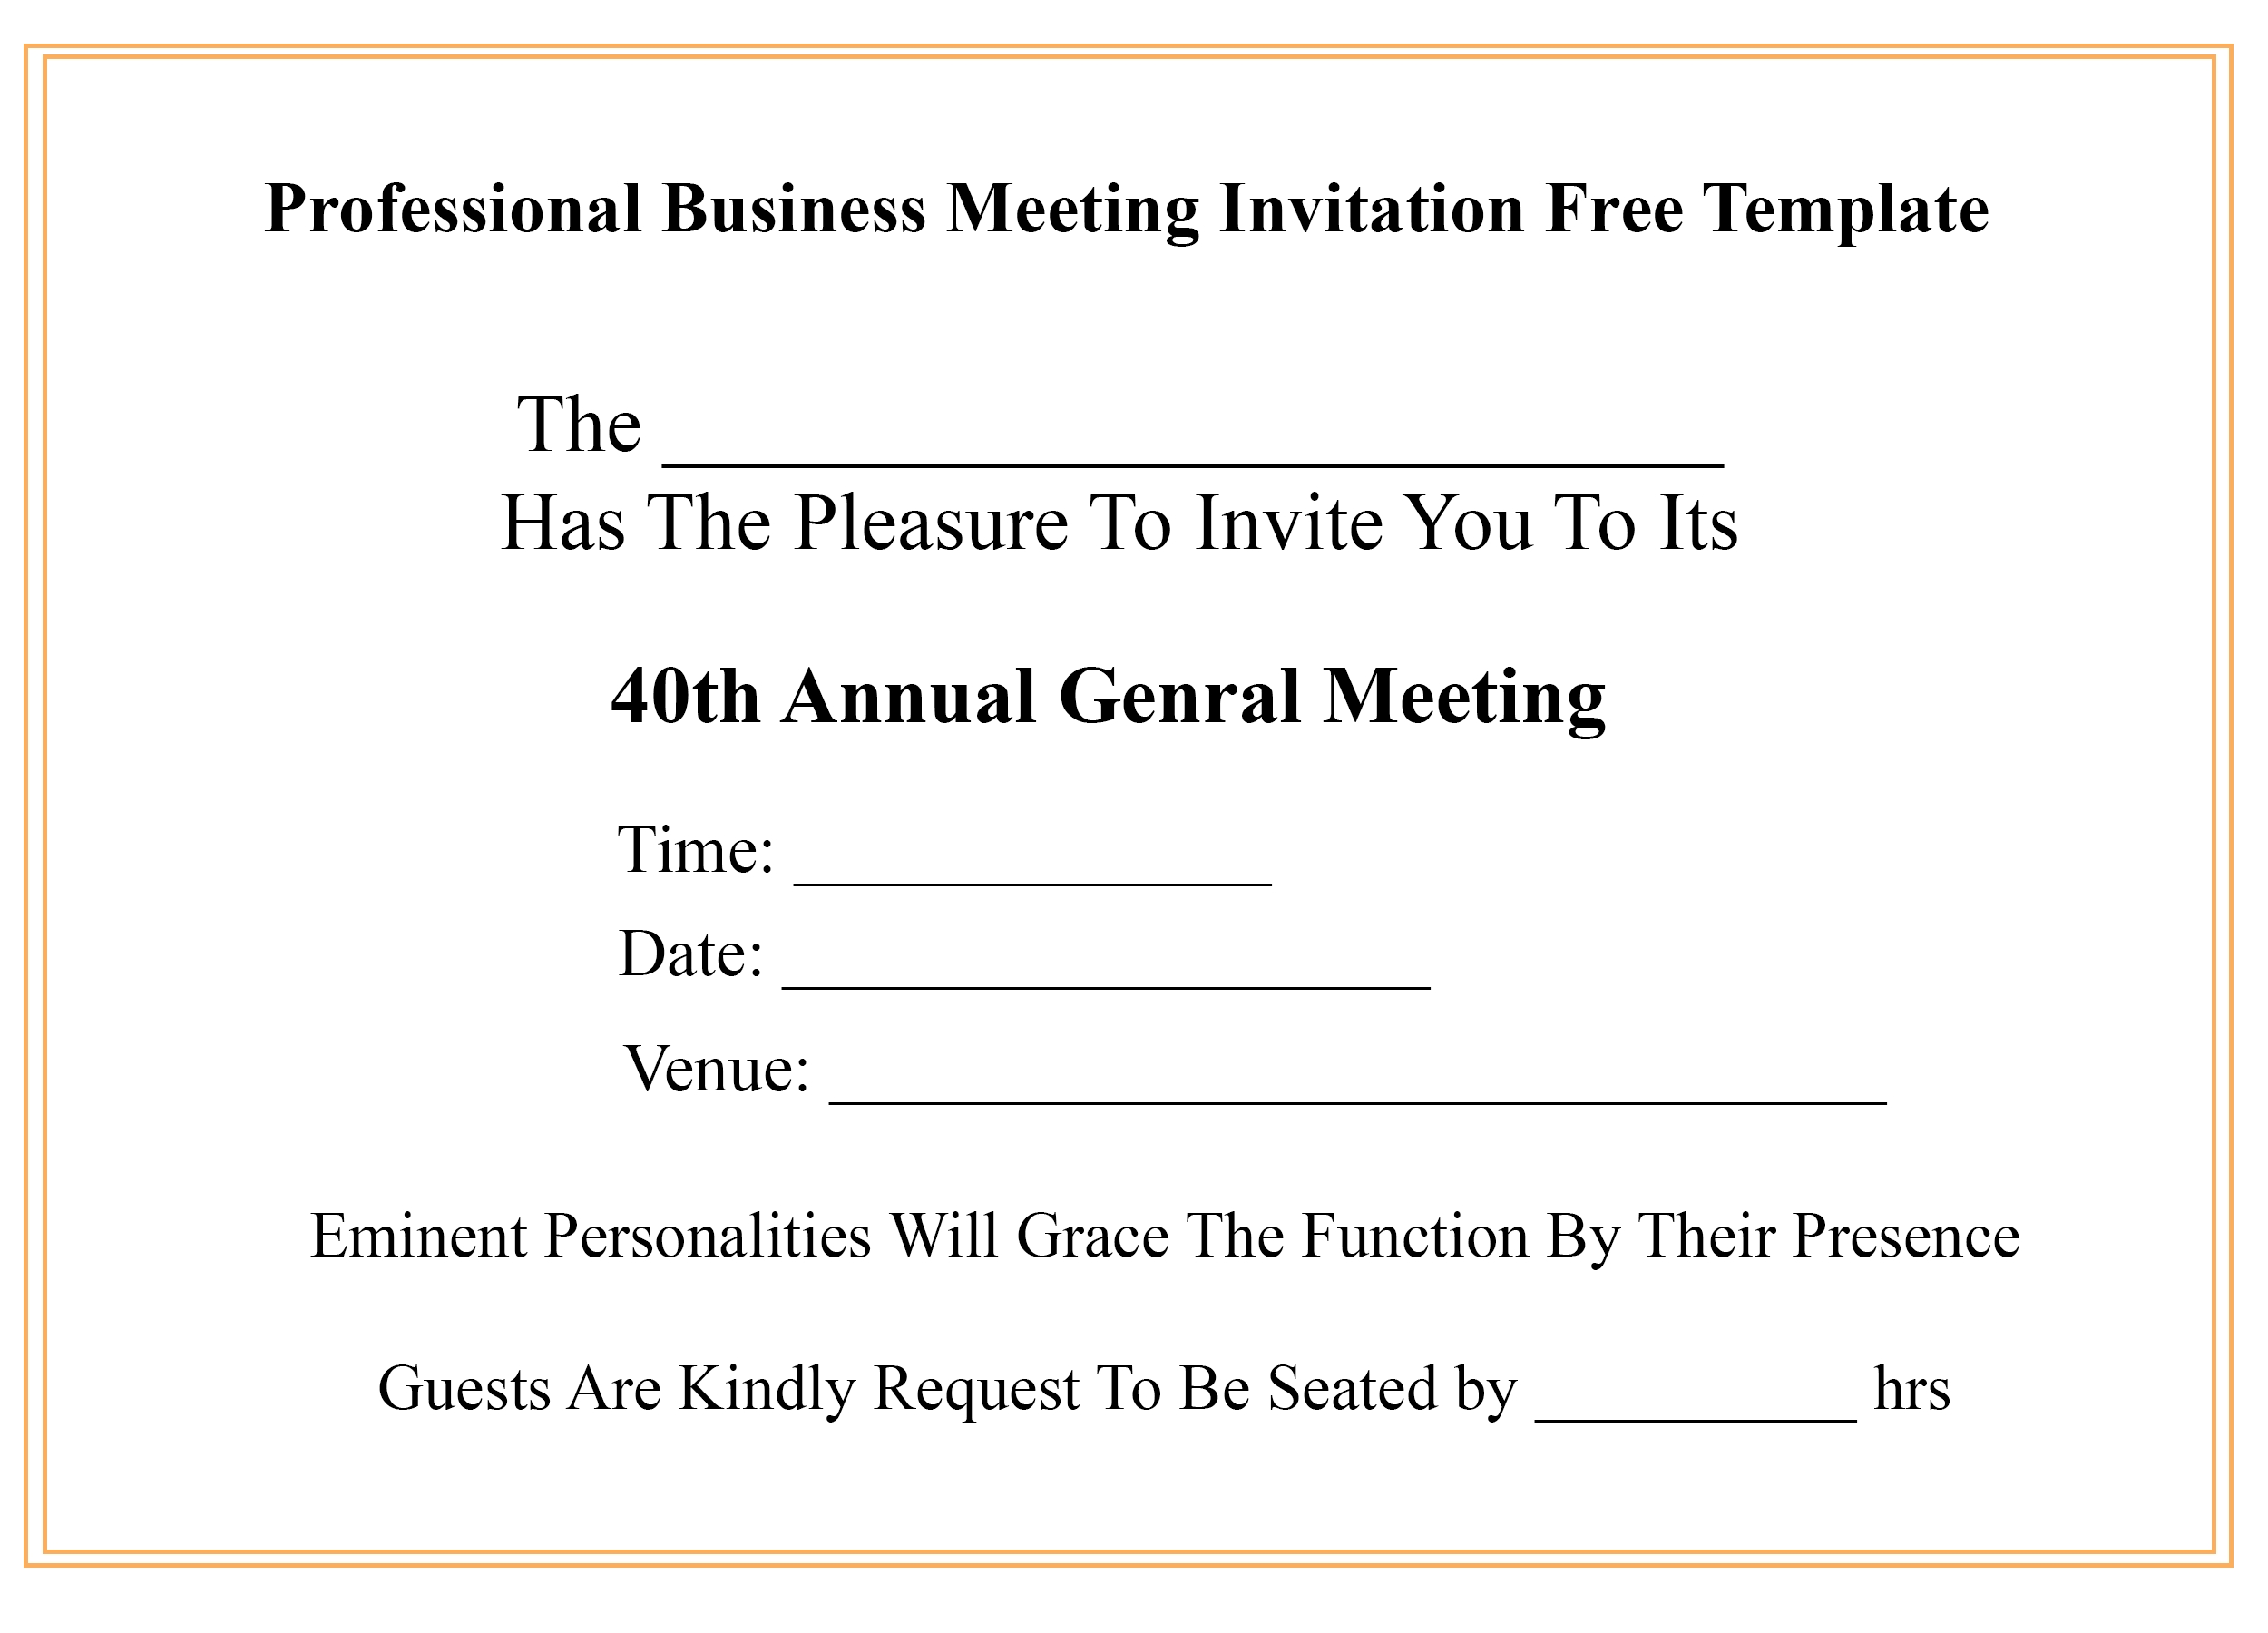 ❤️Free Professional Business Meeting Invitation Template Calendar Meeting Request Template